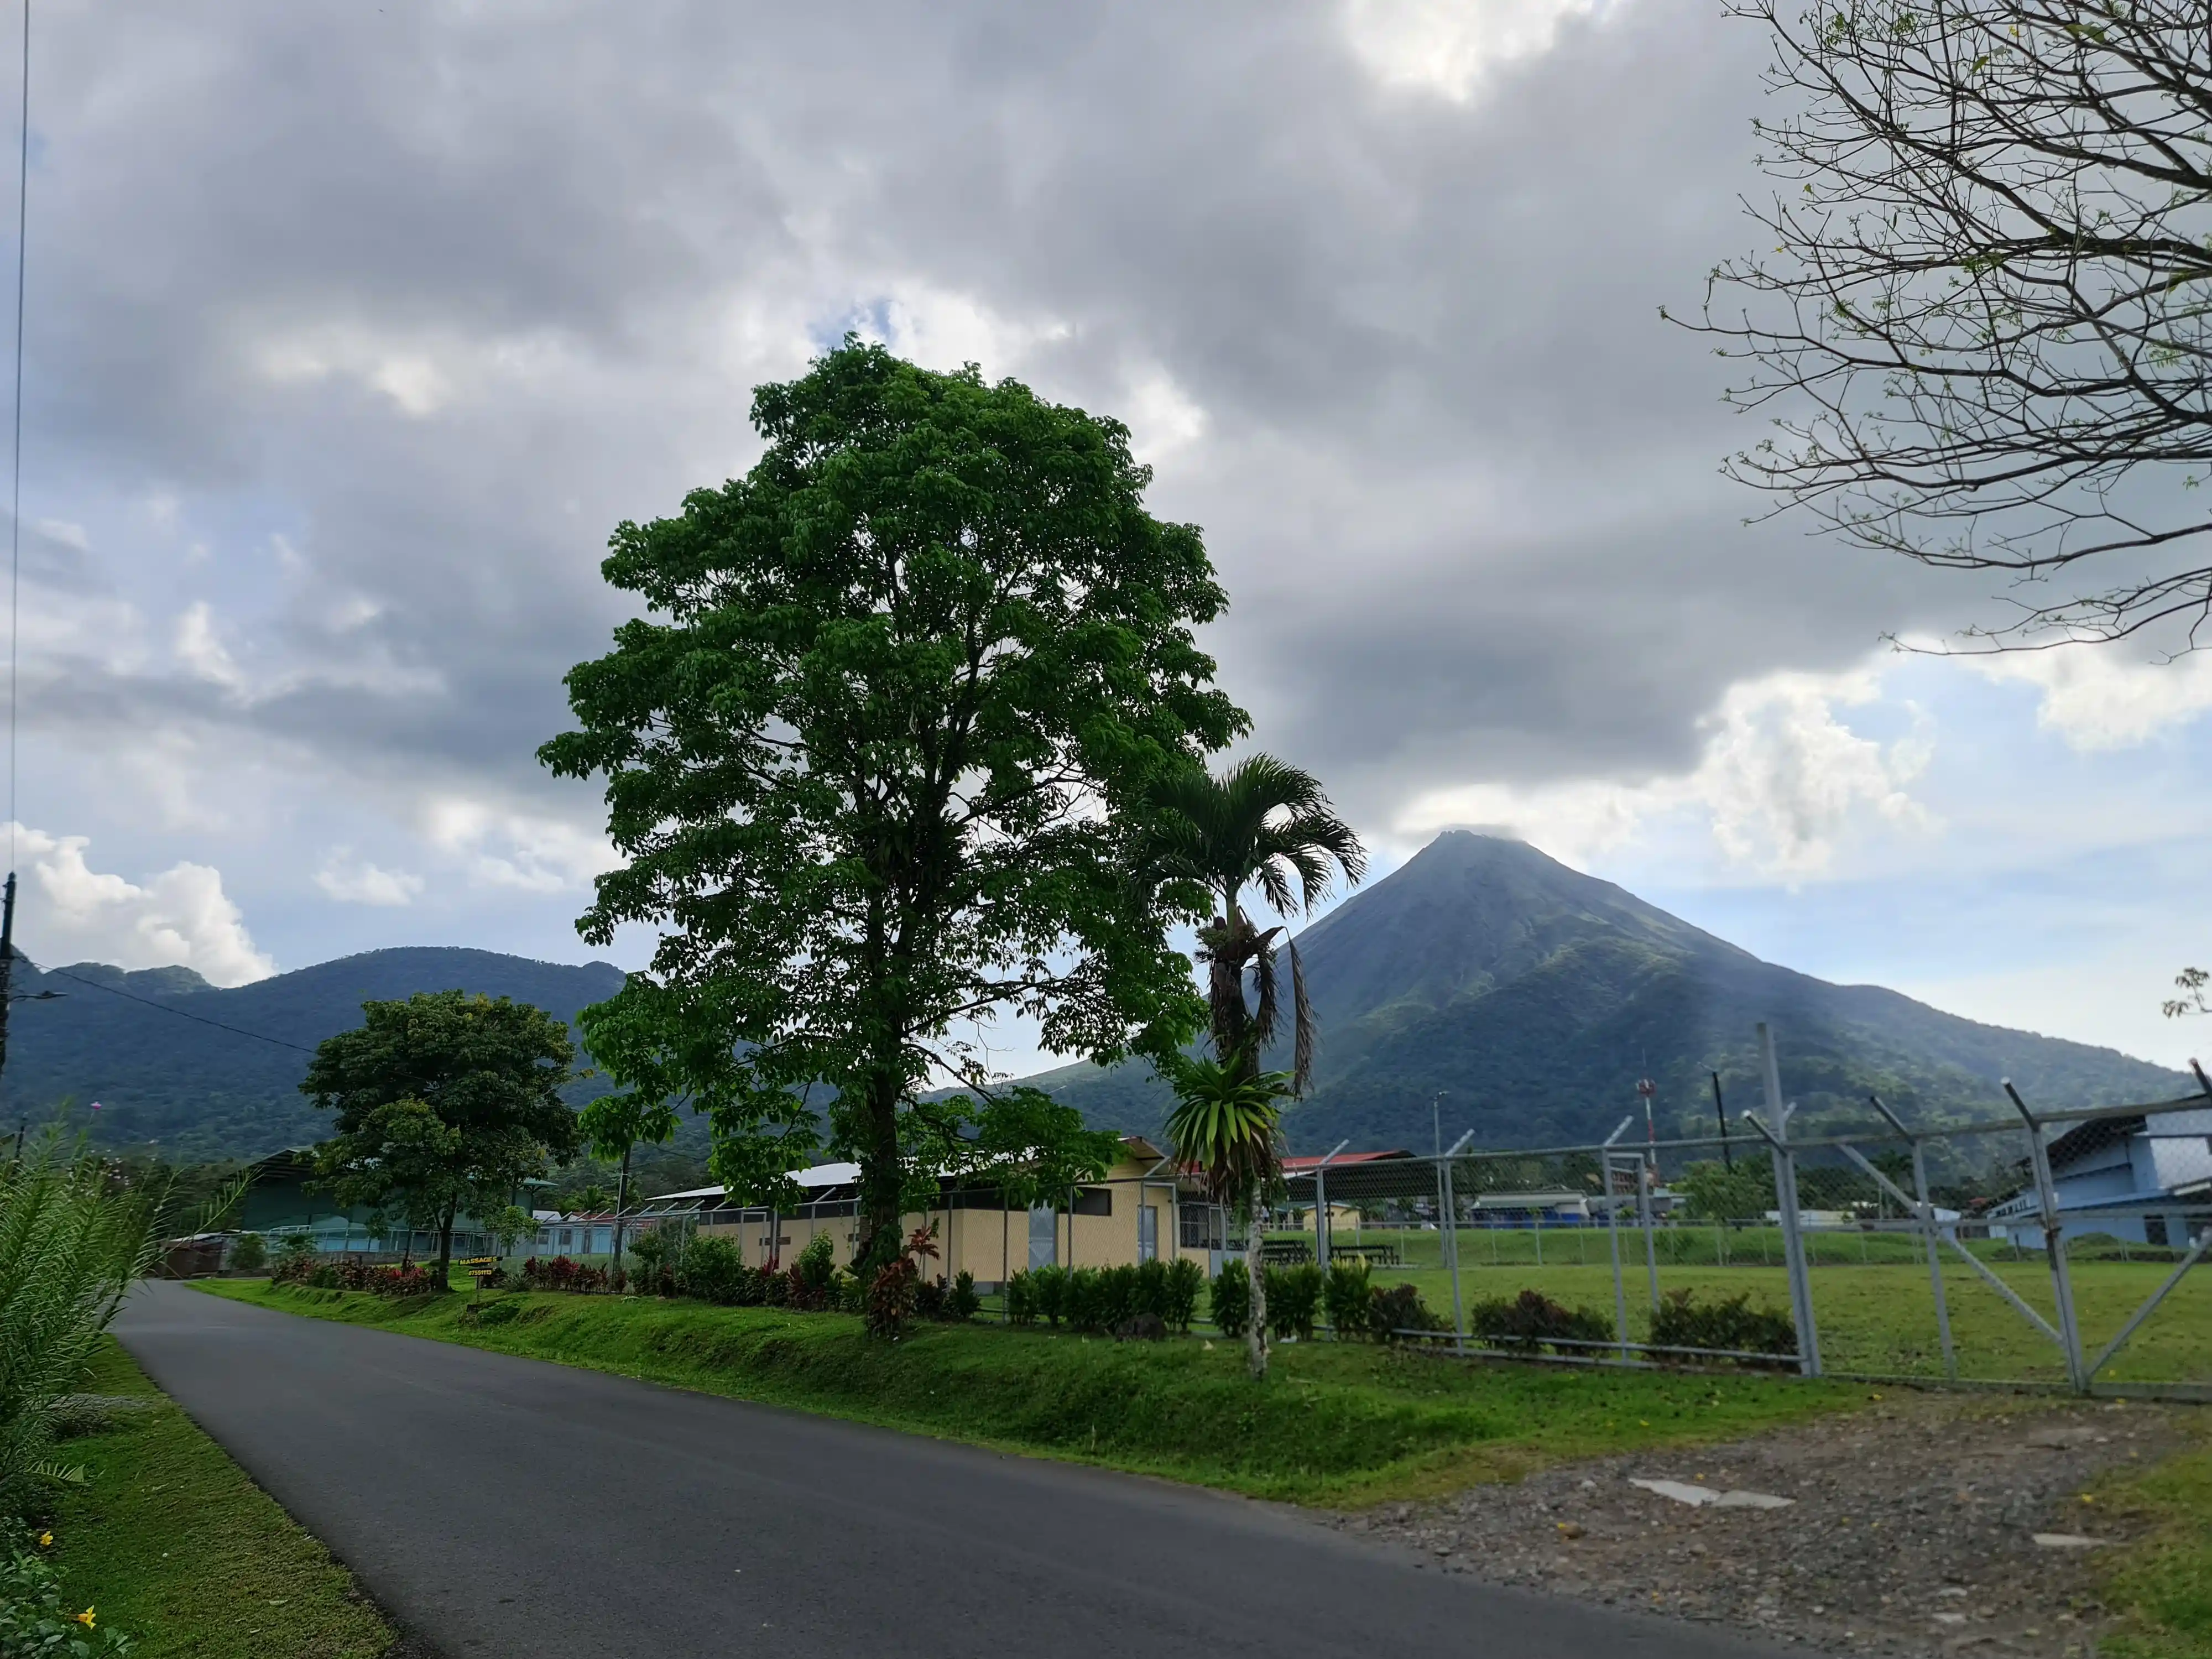 Stunning landscape in La Fortuna, with Guayabon Cabins in the foreground